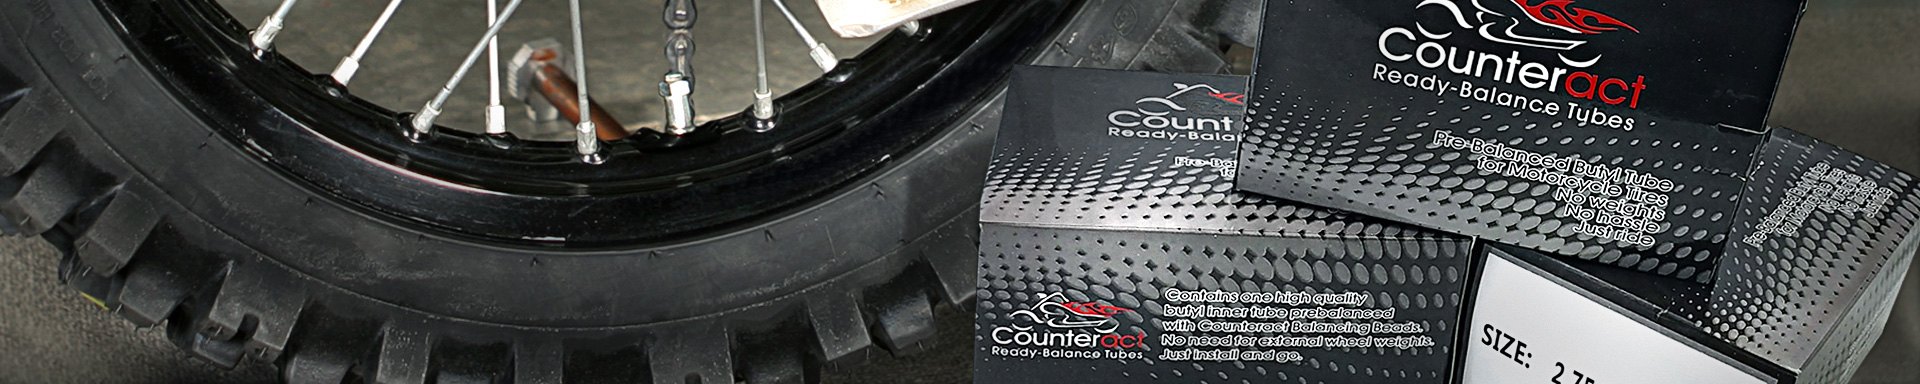 Counteract Motorcycle Wheels & Tires Accessories